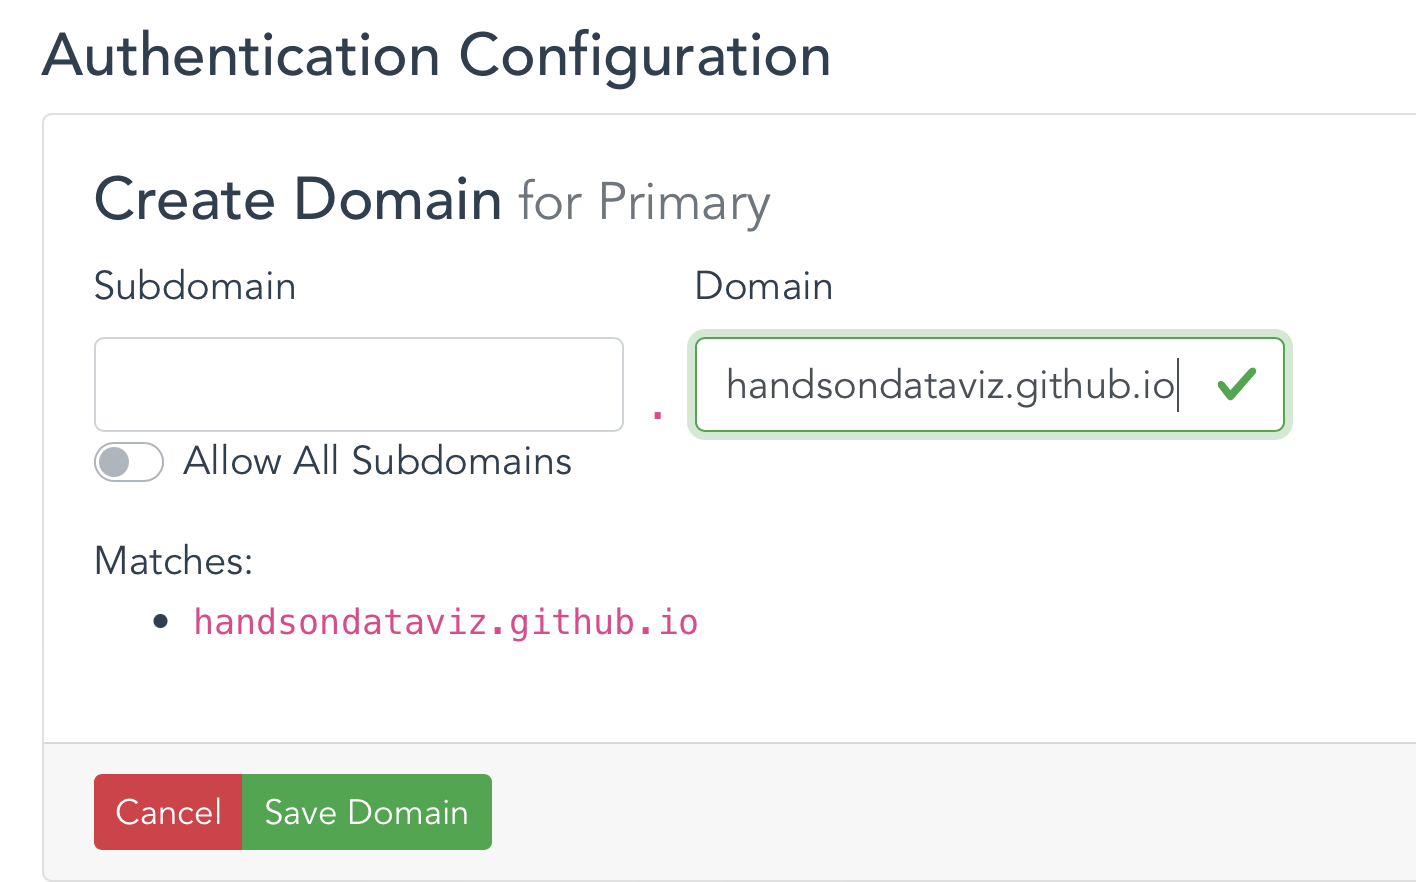 If you choose a Stadia basemap option, register to use domain-based authentication. For example, handsondataviz.github.io is the domain for our demo map on GitHub Pages.